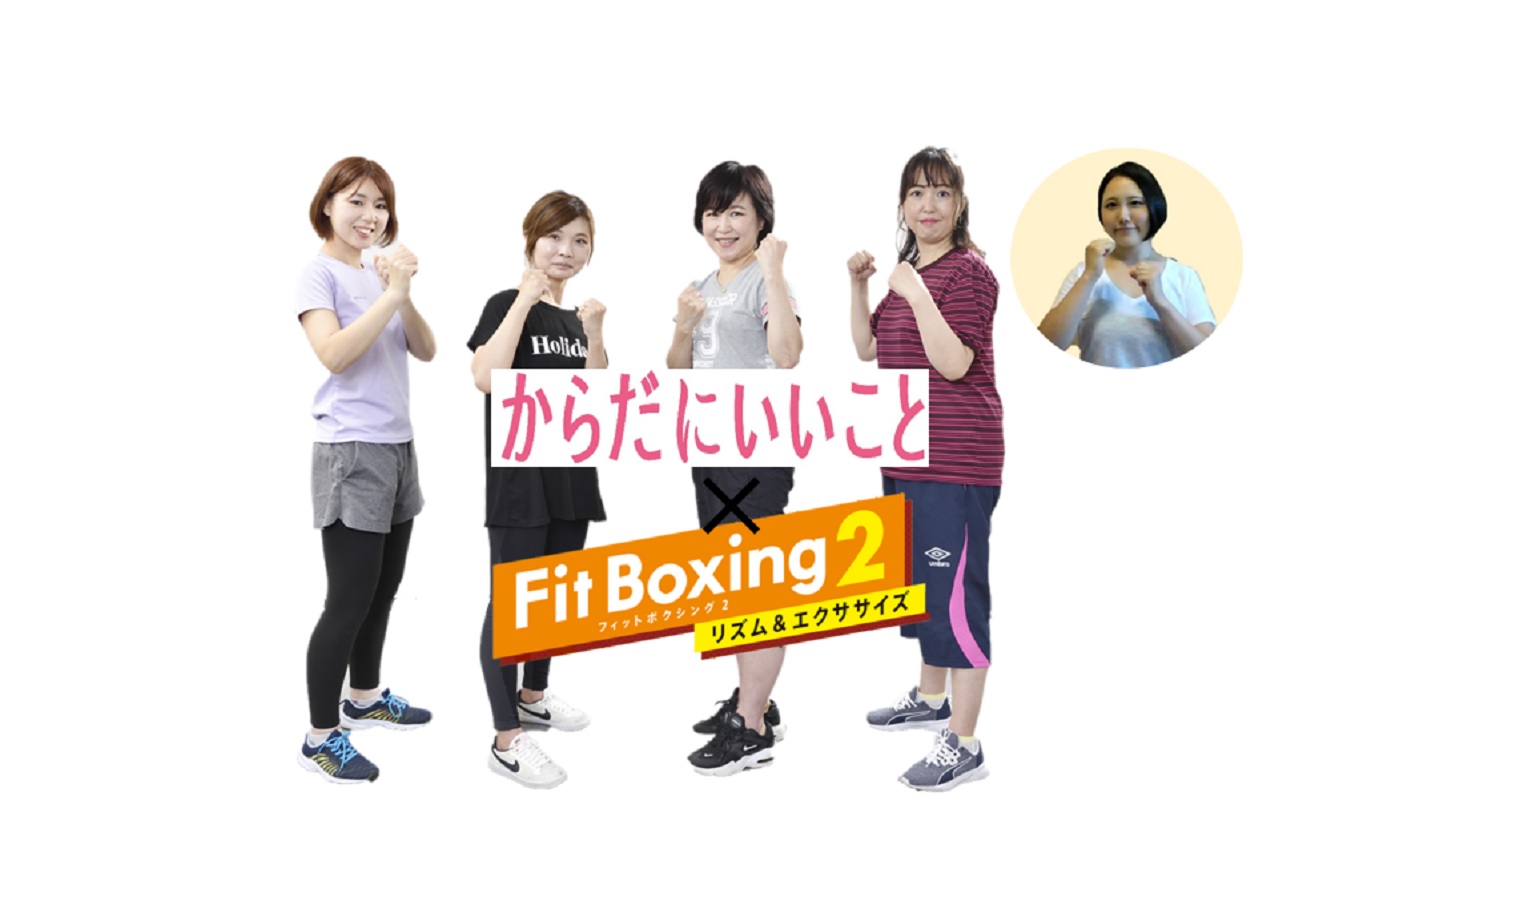 SW  Fit Boxing 2  フィットボクシング2 リズム＆エクササイズ